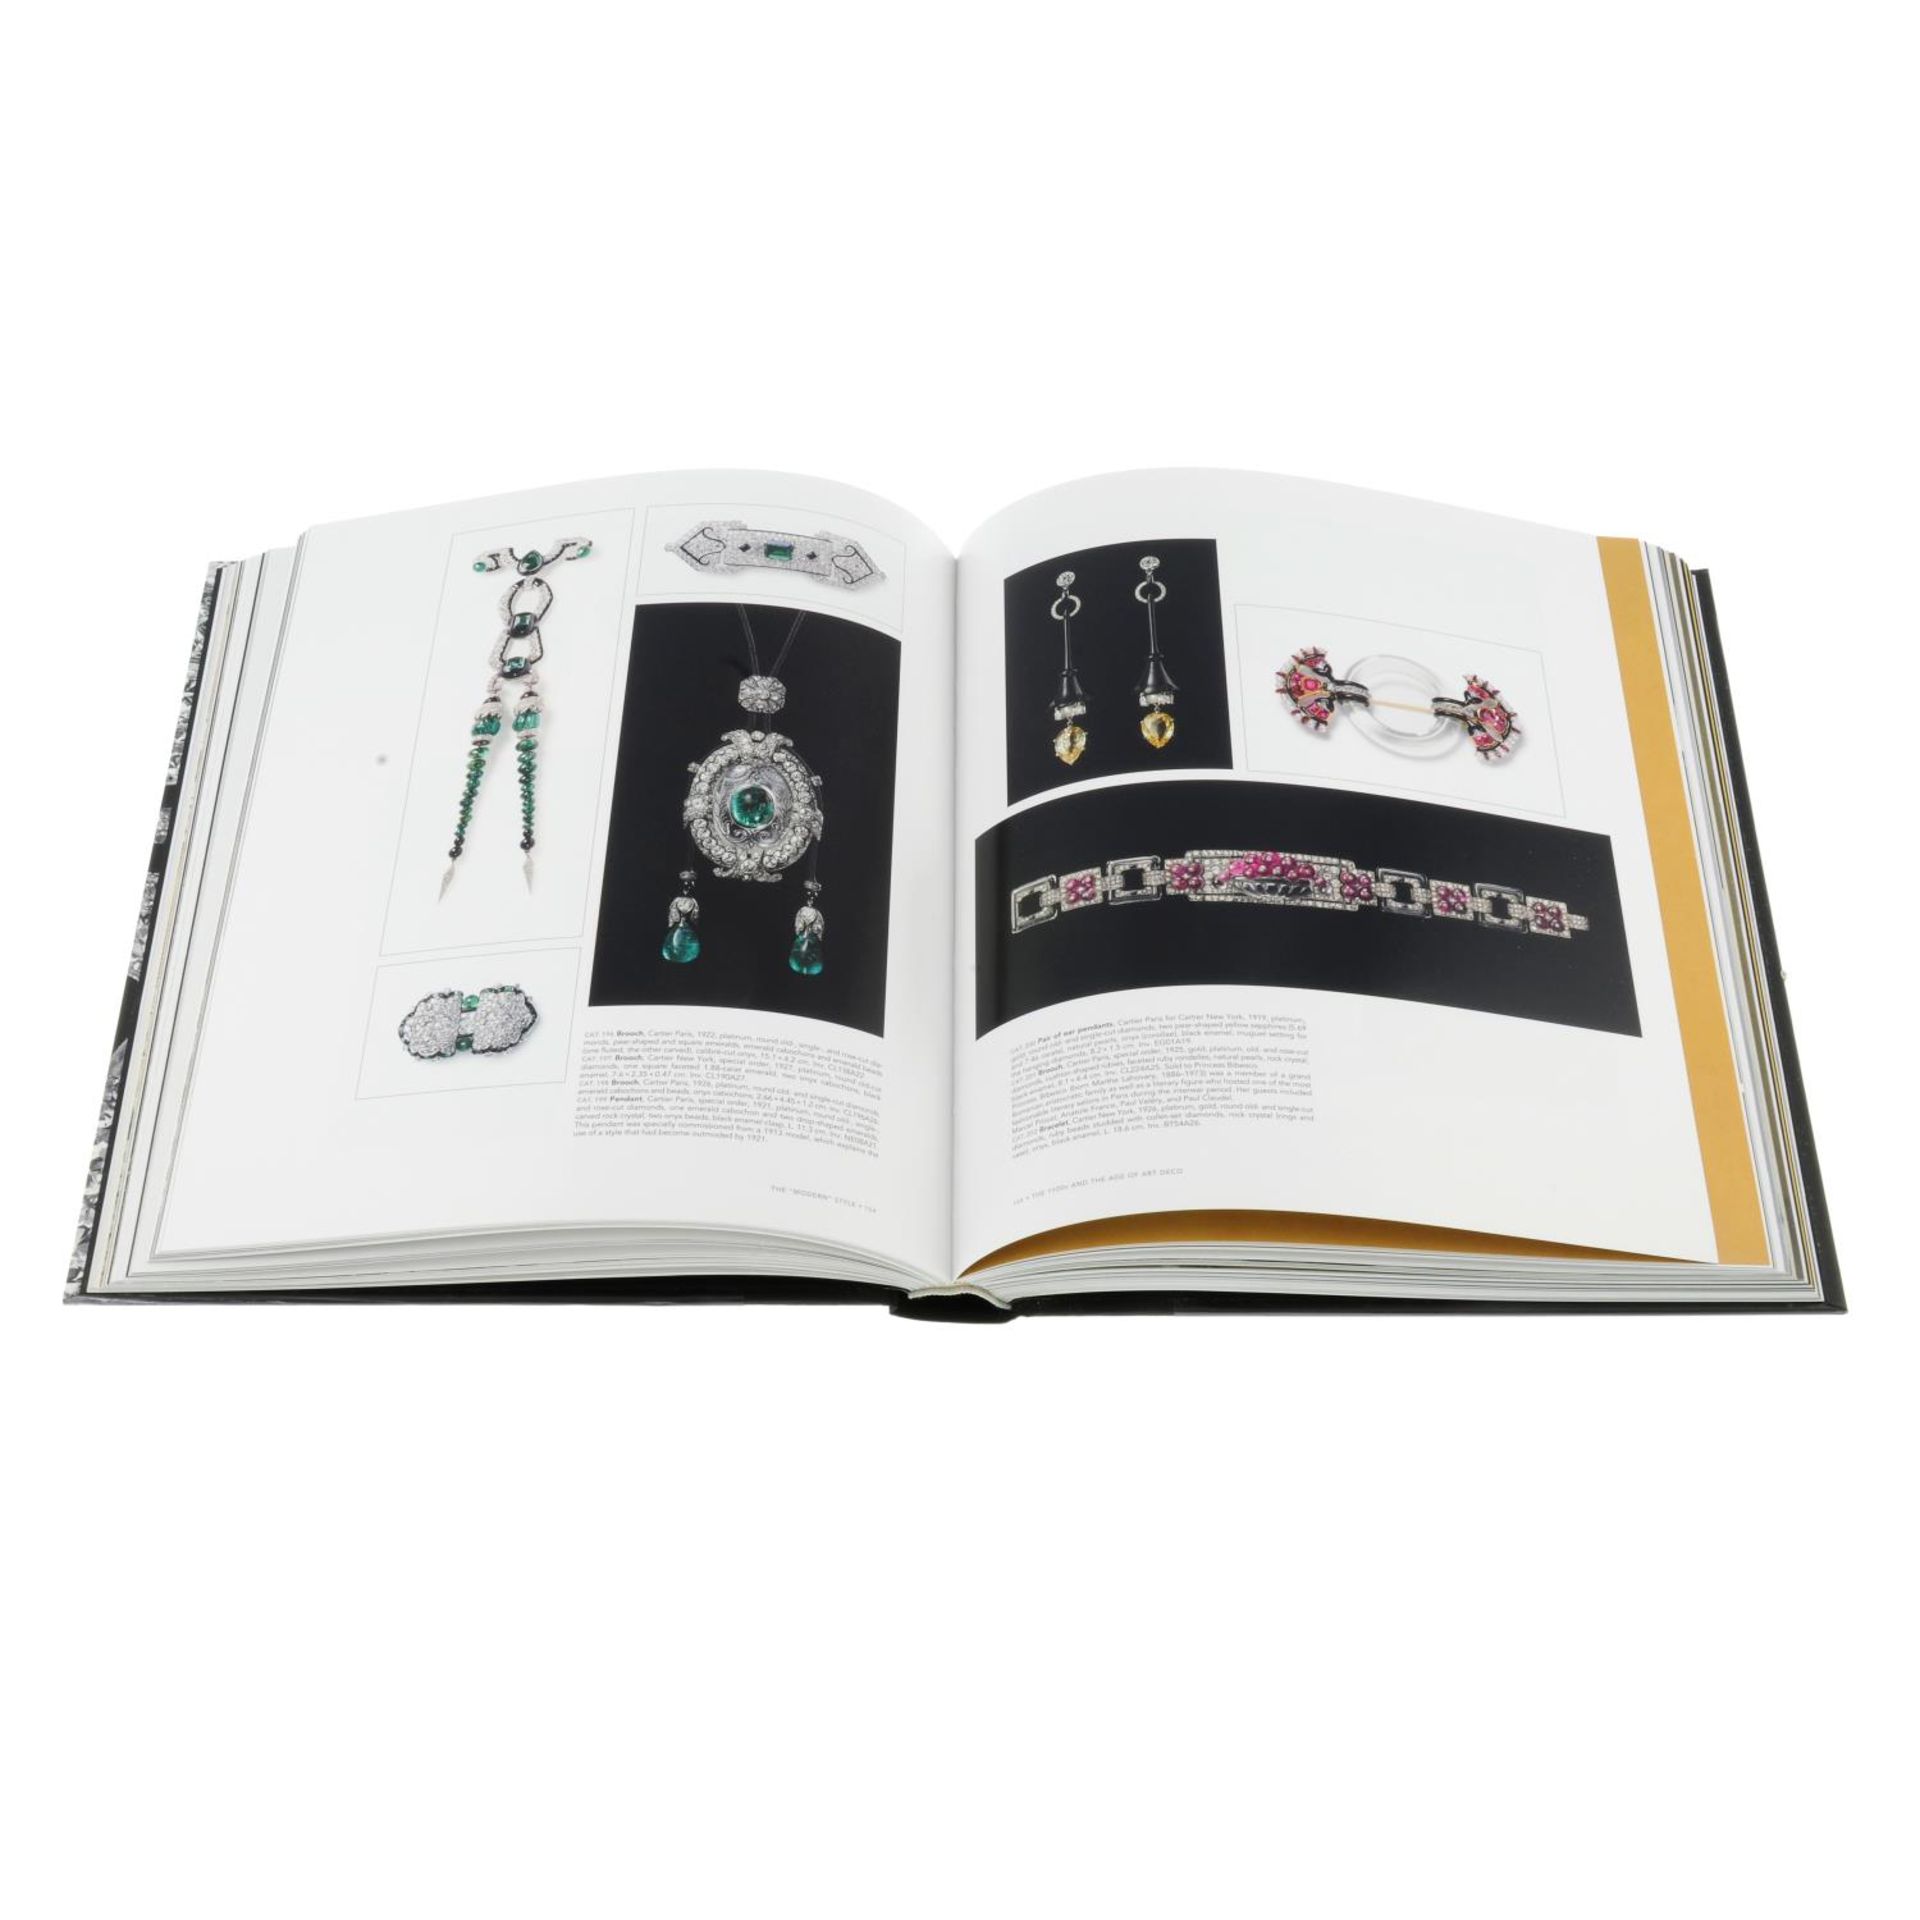 CARTIER - a Style & History book. - Image 4 of 5